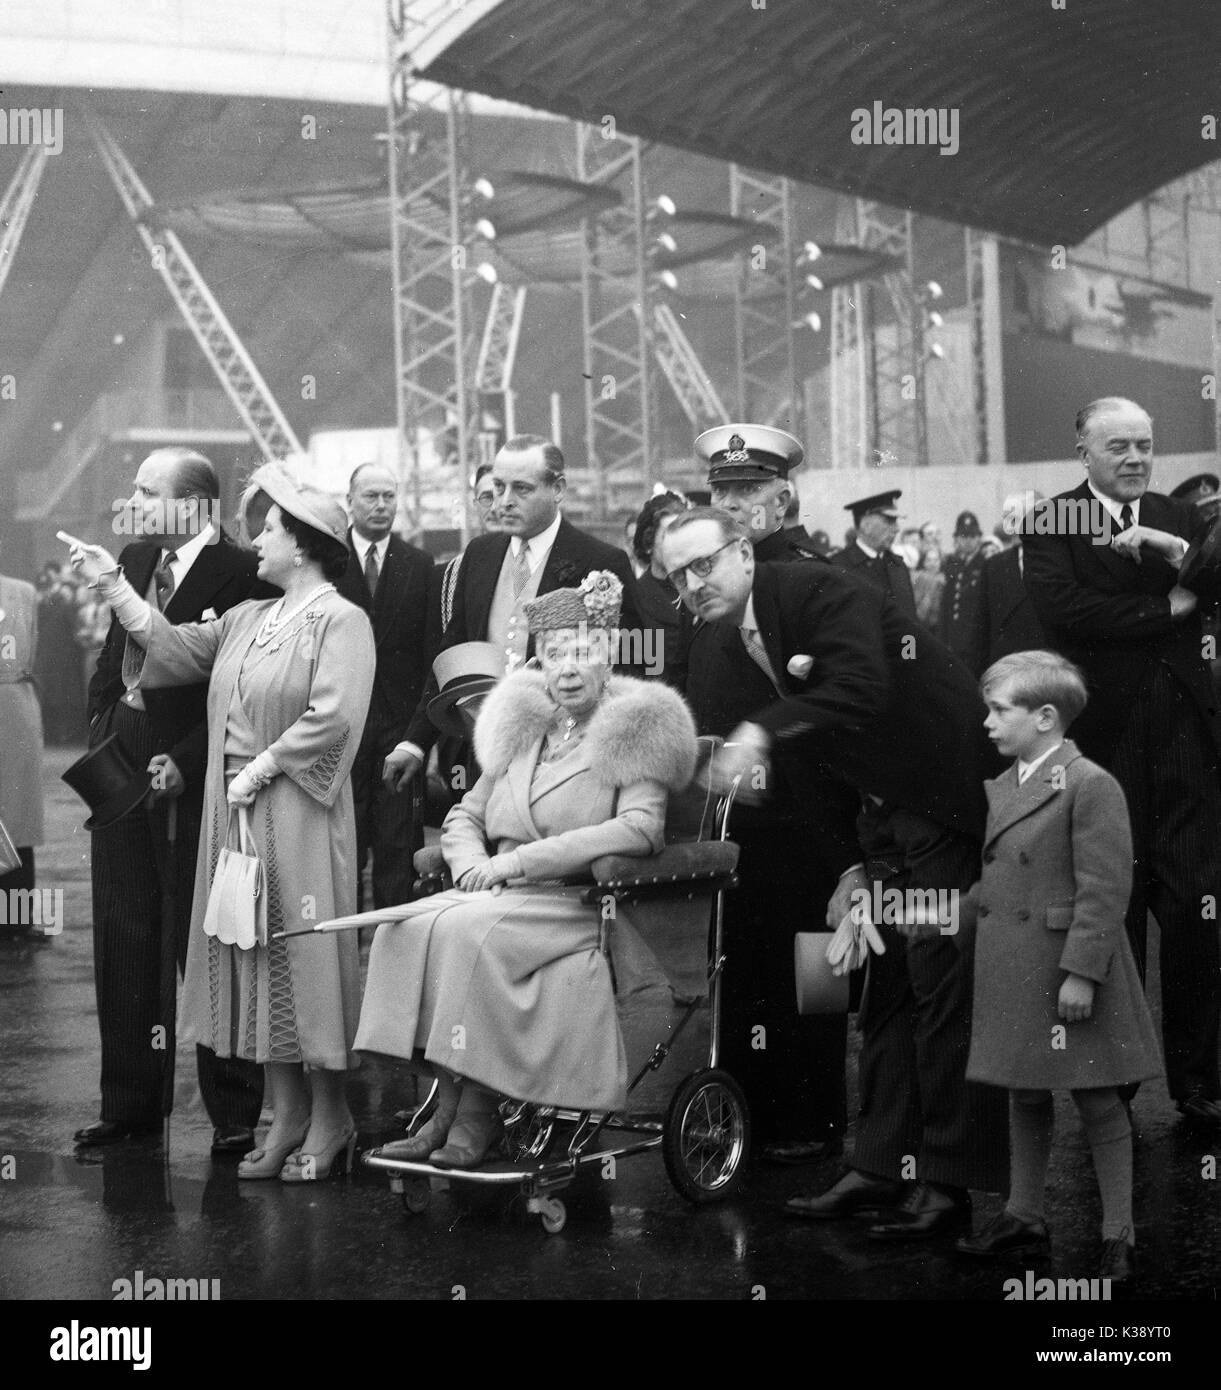 5th May 1951: Queen Elizabeth the Queen Mother, Queen Mary , Prince Henry the  Duke of Gloucester during a visit to the Festival of Britain on the South Bank in London 5th May 1951. Stock Photo